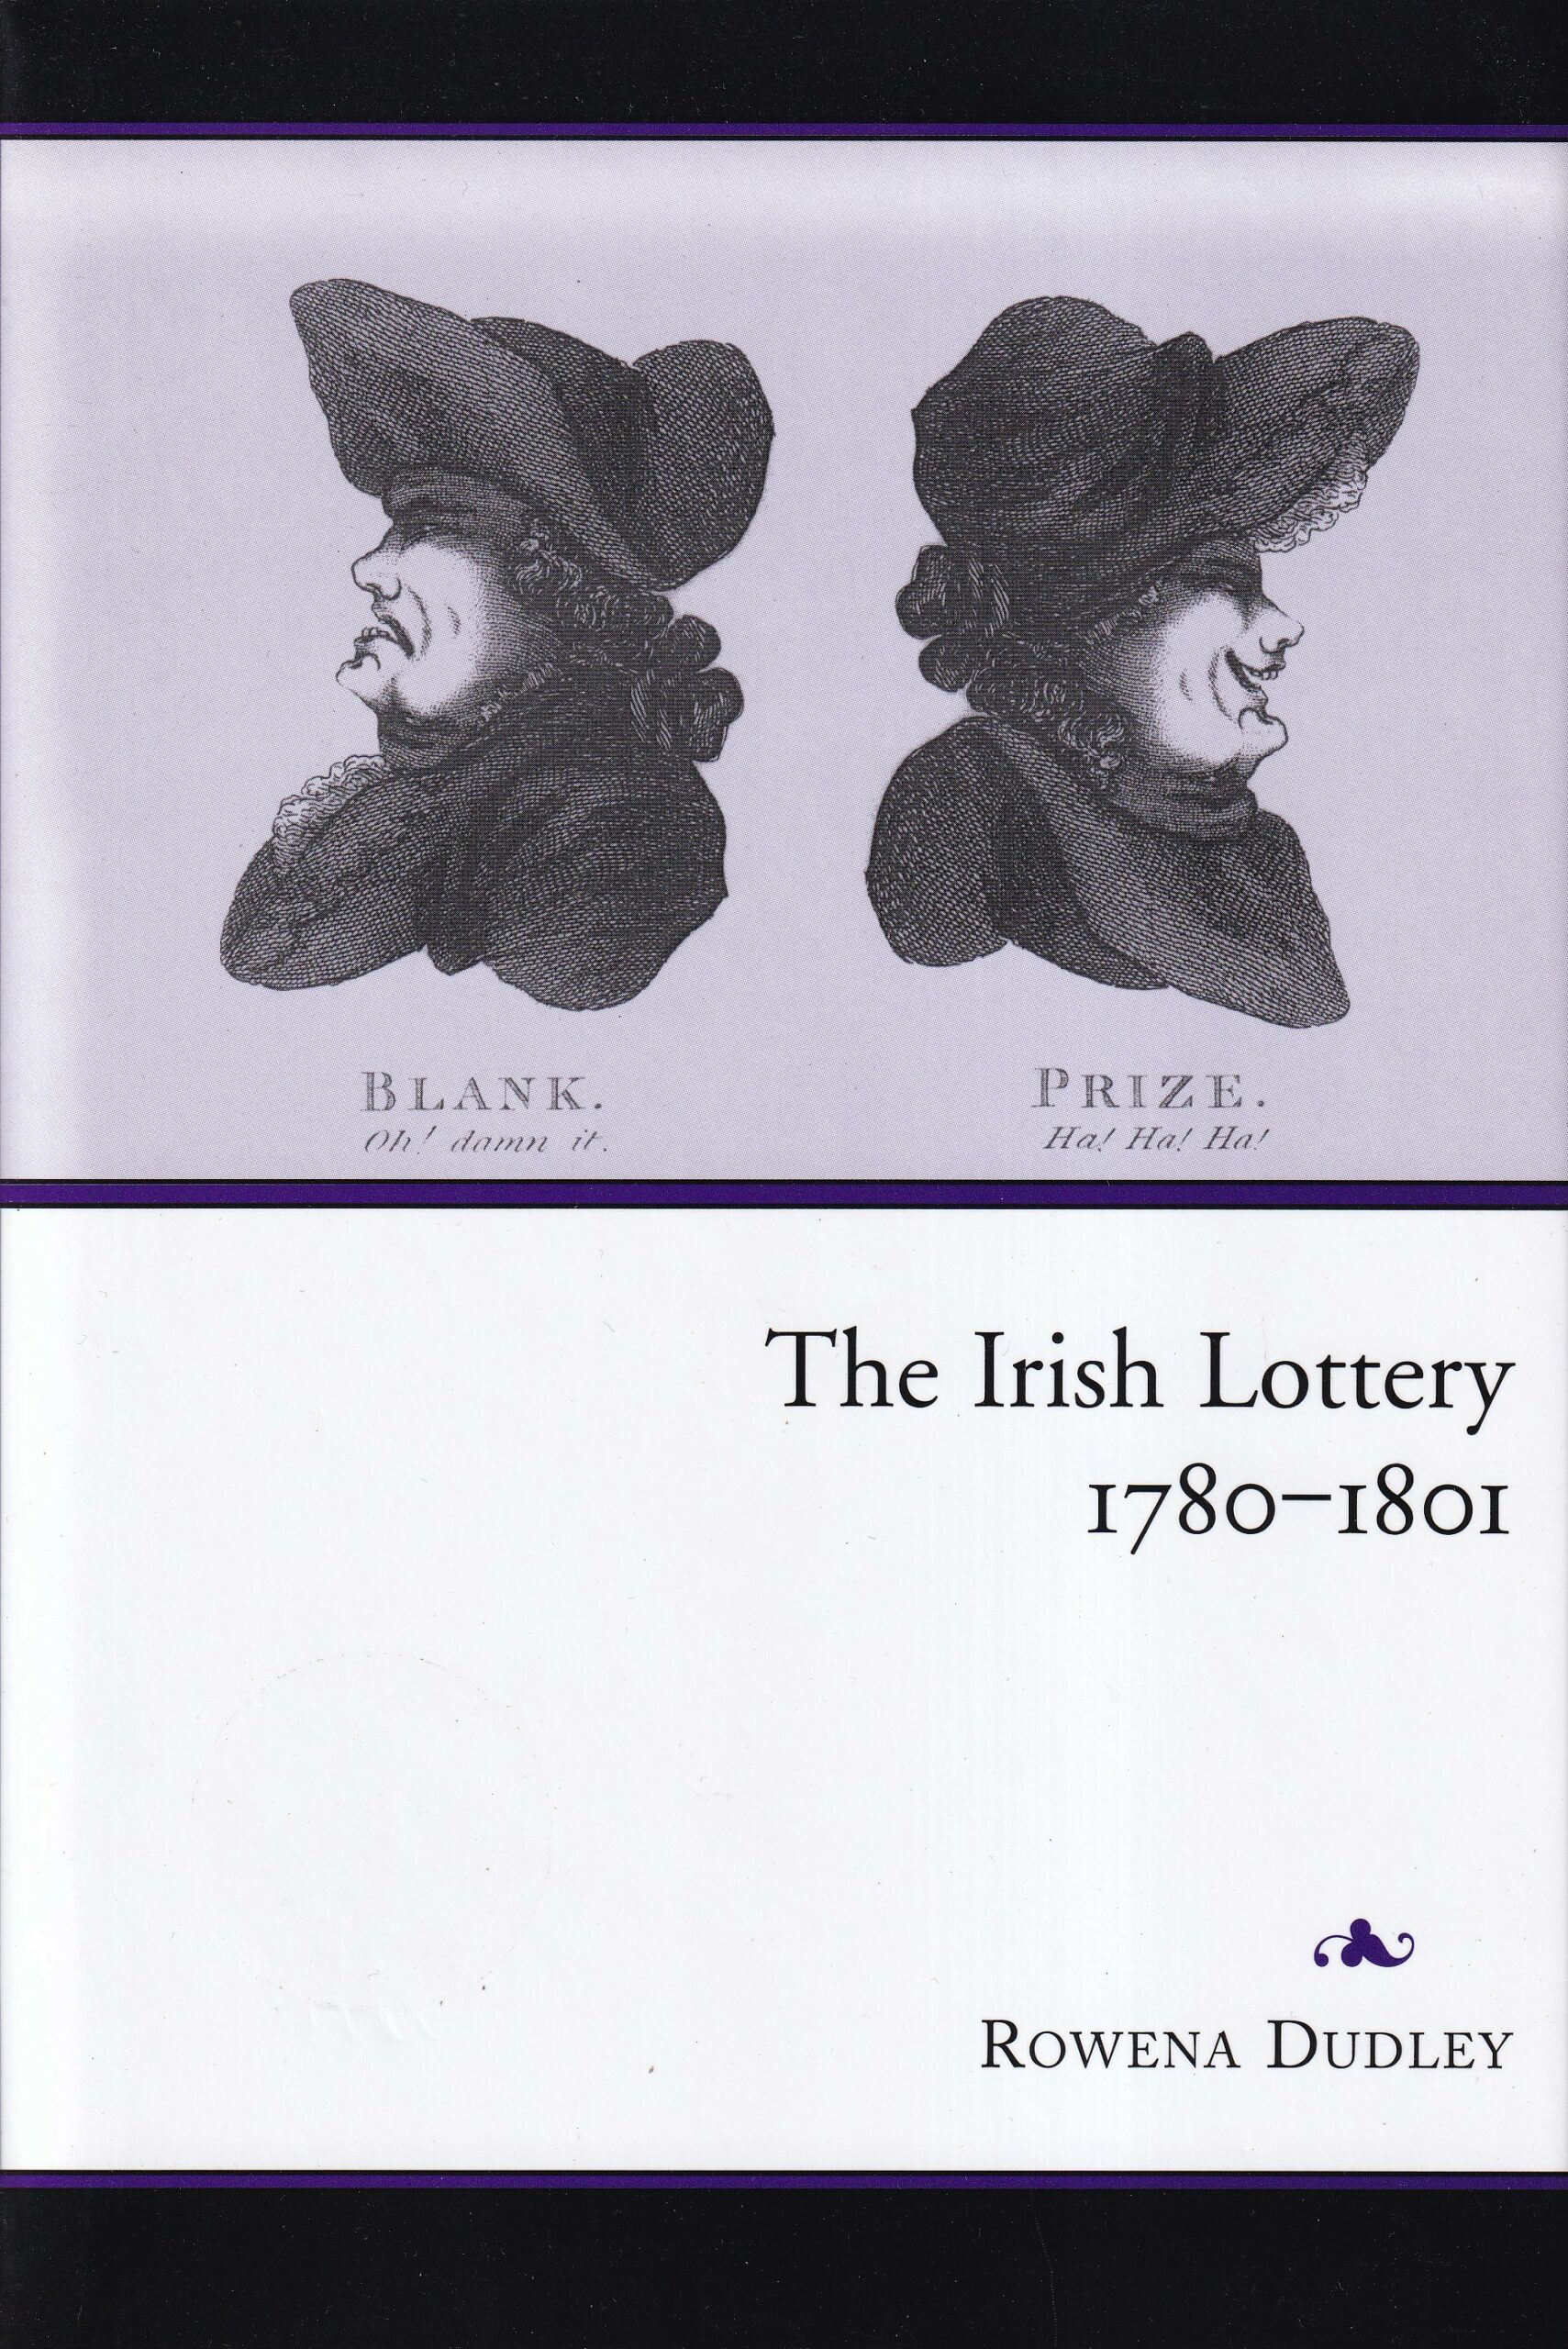 The Irish Lottery 1780-1801 by Rowena Dudley